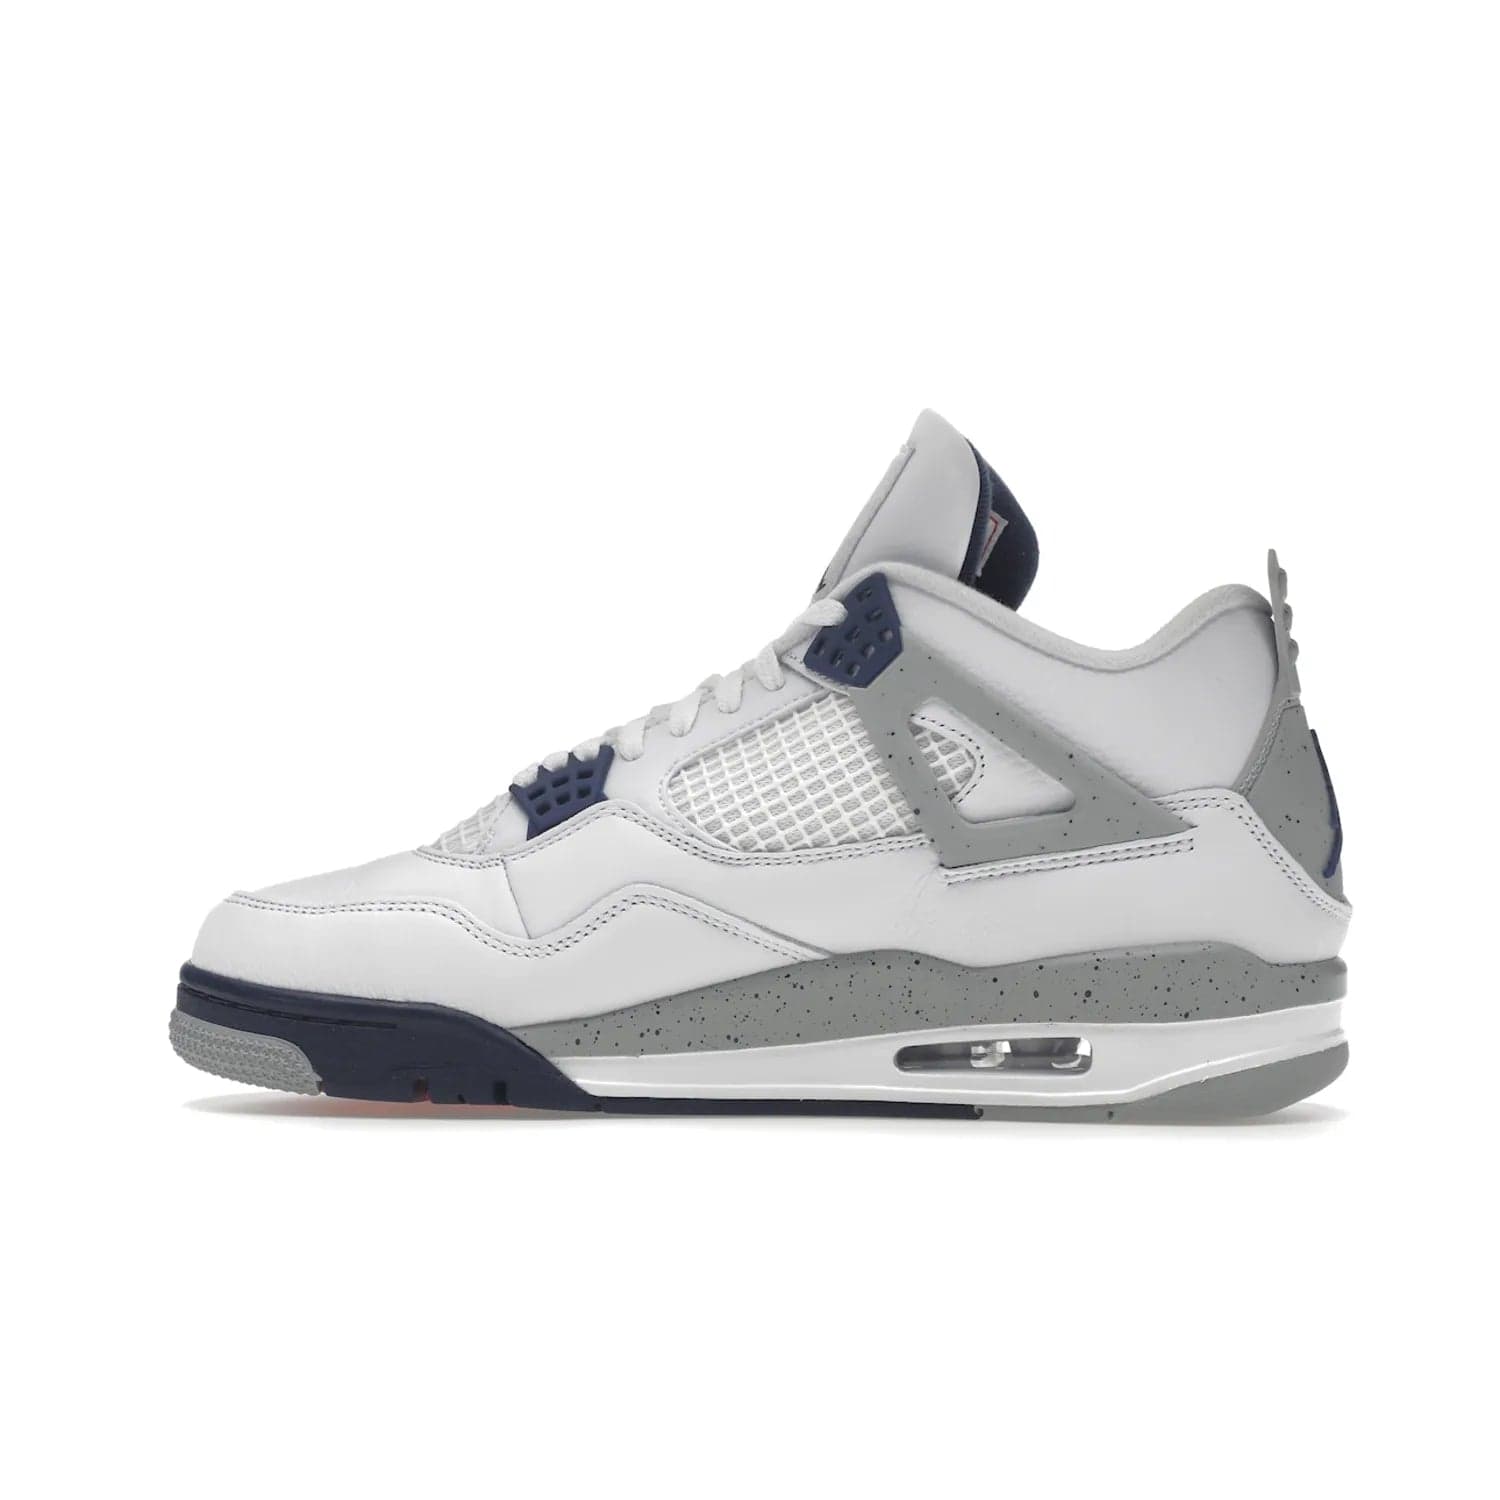 Jordan 4 Retro Midnight Navy - Image 20 - Only at www.BallersClubKickz.com - Shop the Air Jordan Retro 4 White Midnight Navy. Stand out with a classic white leather upper, black support wings, midnight navy eyelets, and Crimson Jumpman tongue tag. Unbeatable comfort with two-tone polyurethane midsole with encapsulated Air technology. Get yours before October 29th, 2022.